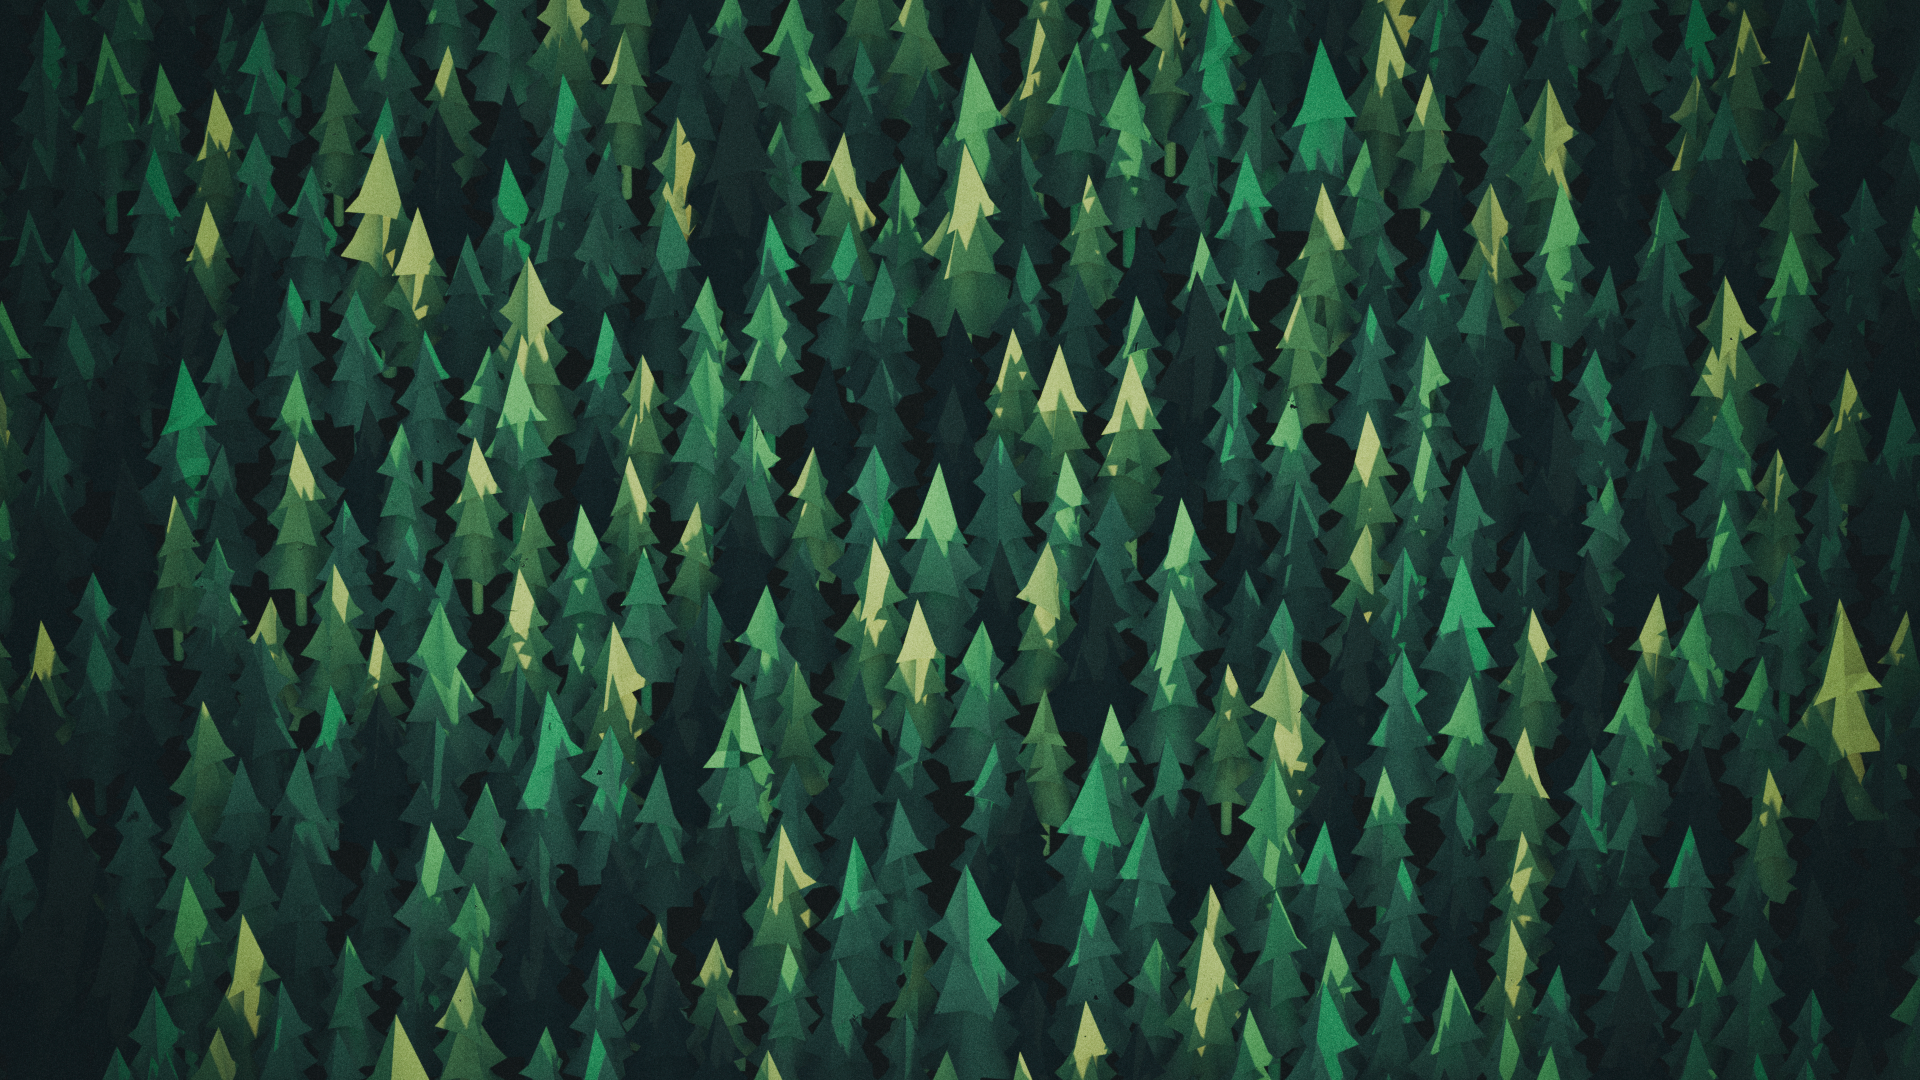 General 1920x1080 trees digital art forest green nature summer pine trees